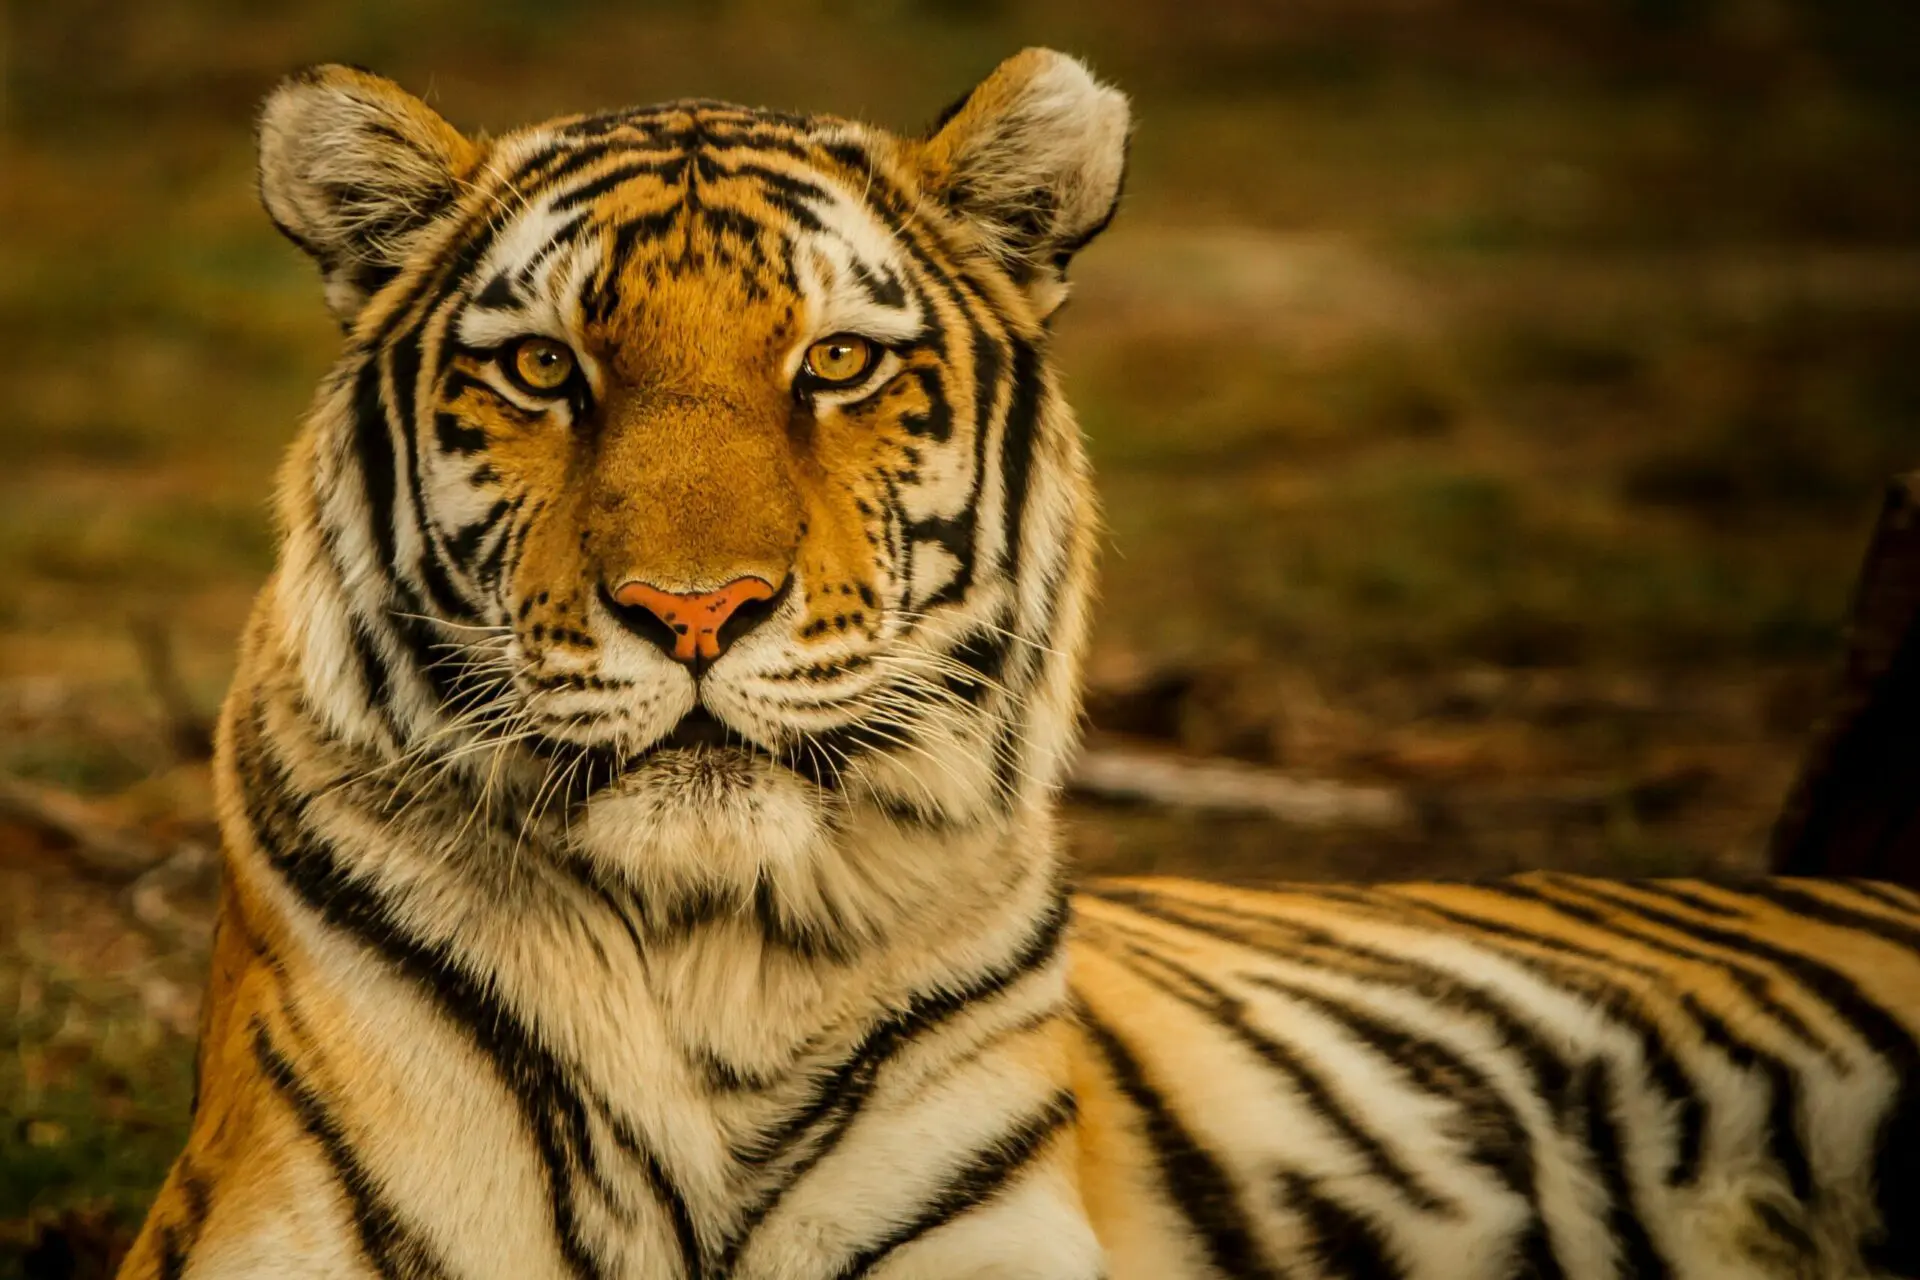 close-up photo of a Bengal tiger with a blurred background as seen on india safari